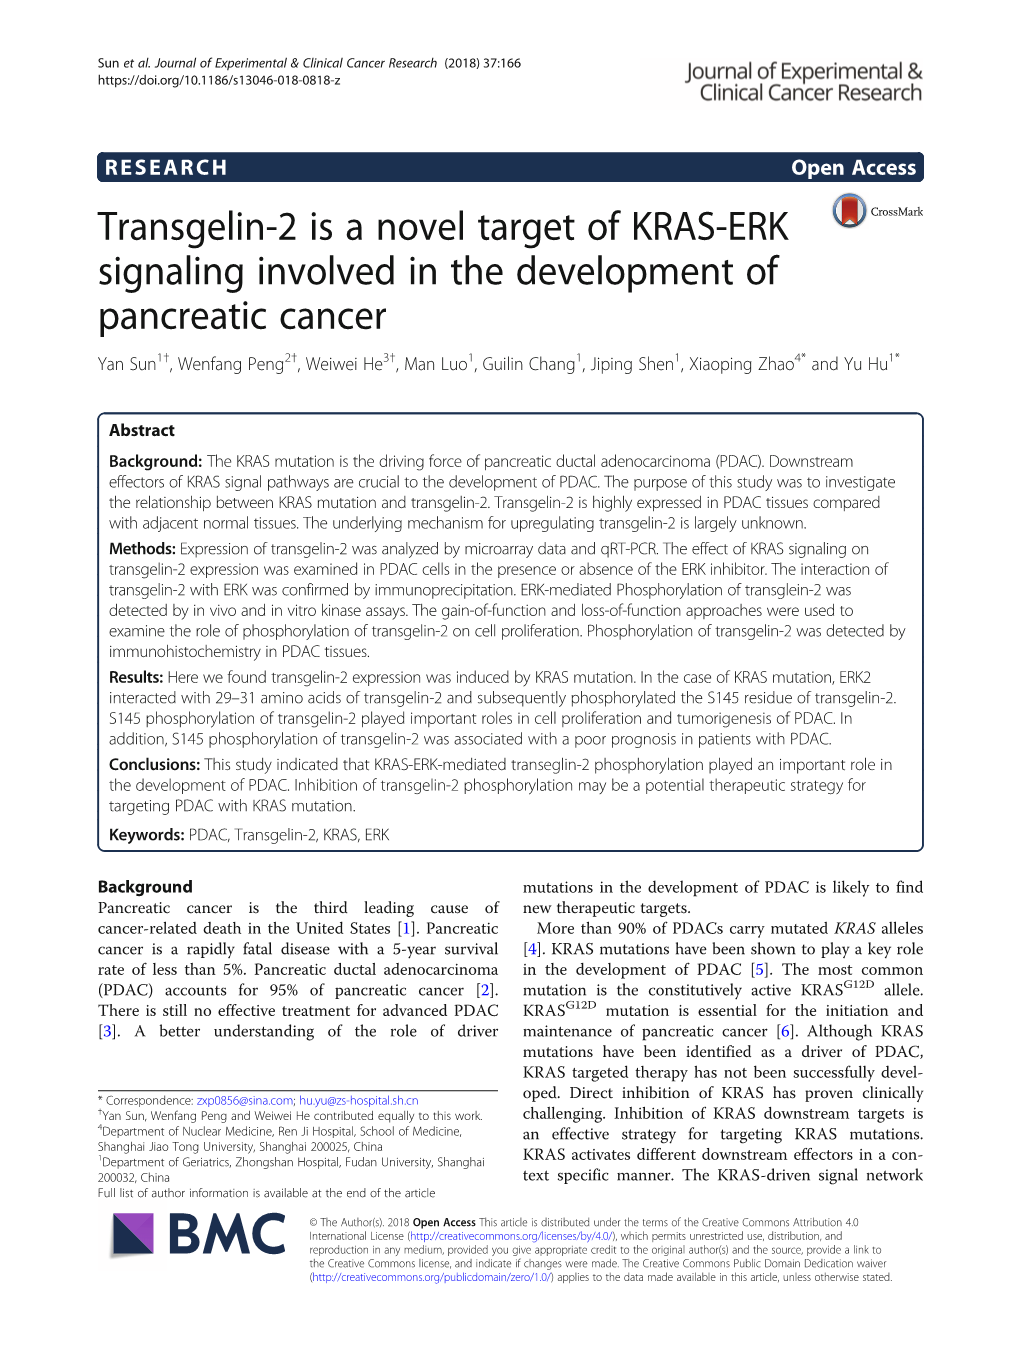 Transgelin-2 Is a Novel Target of KRAS-ERK Signaling Involved in The